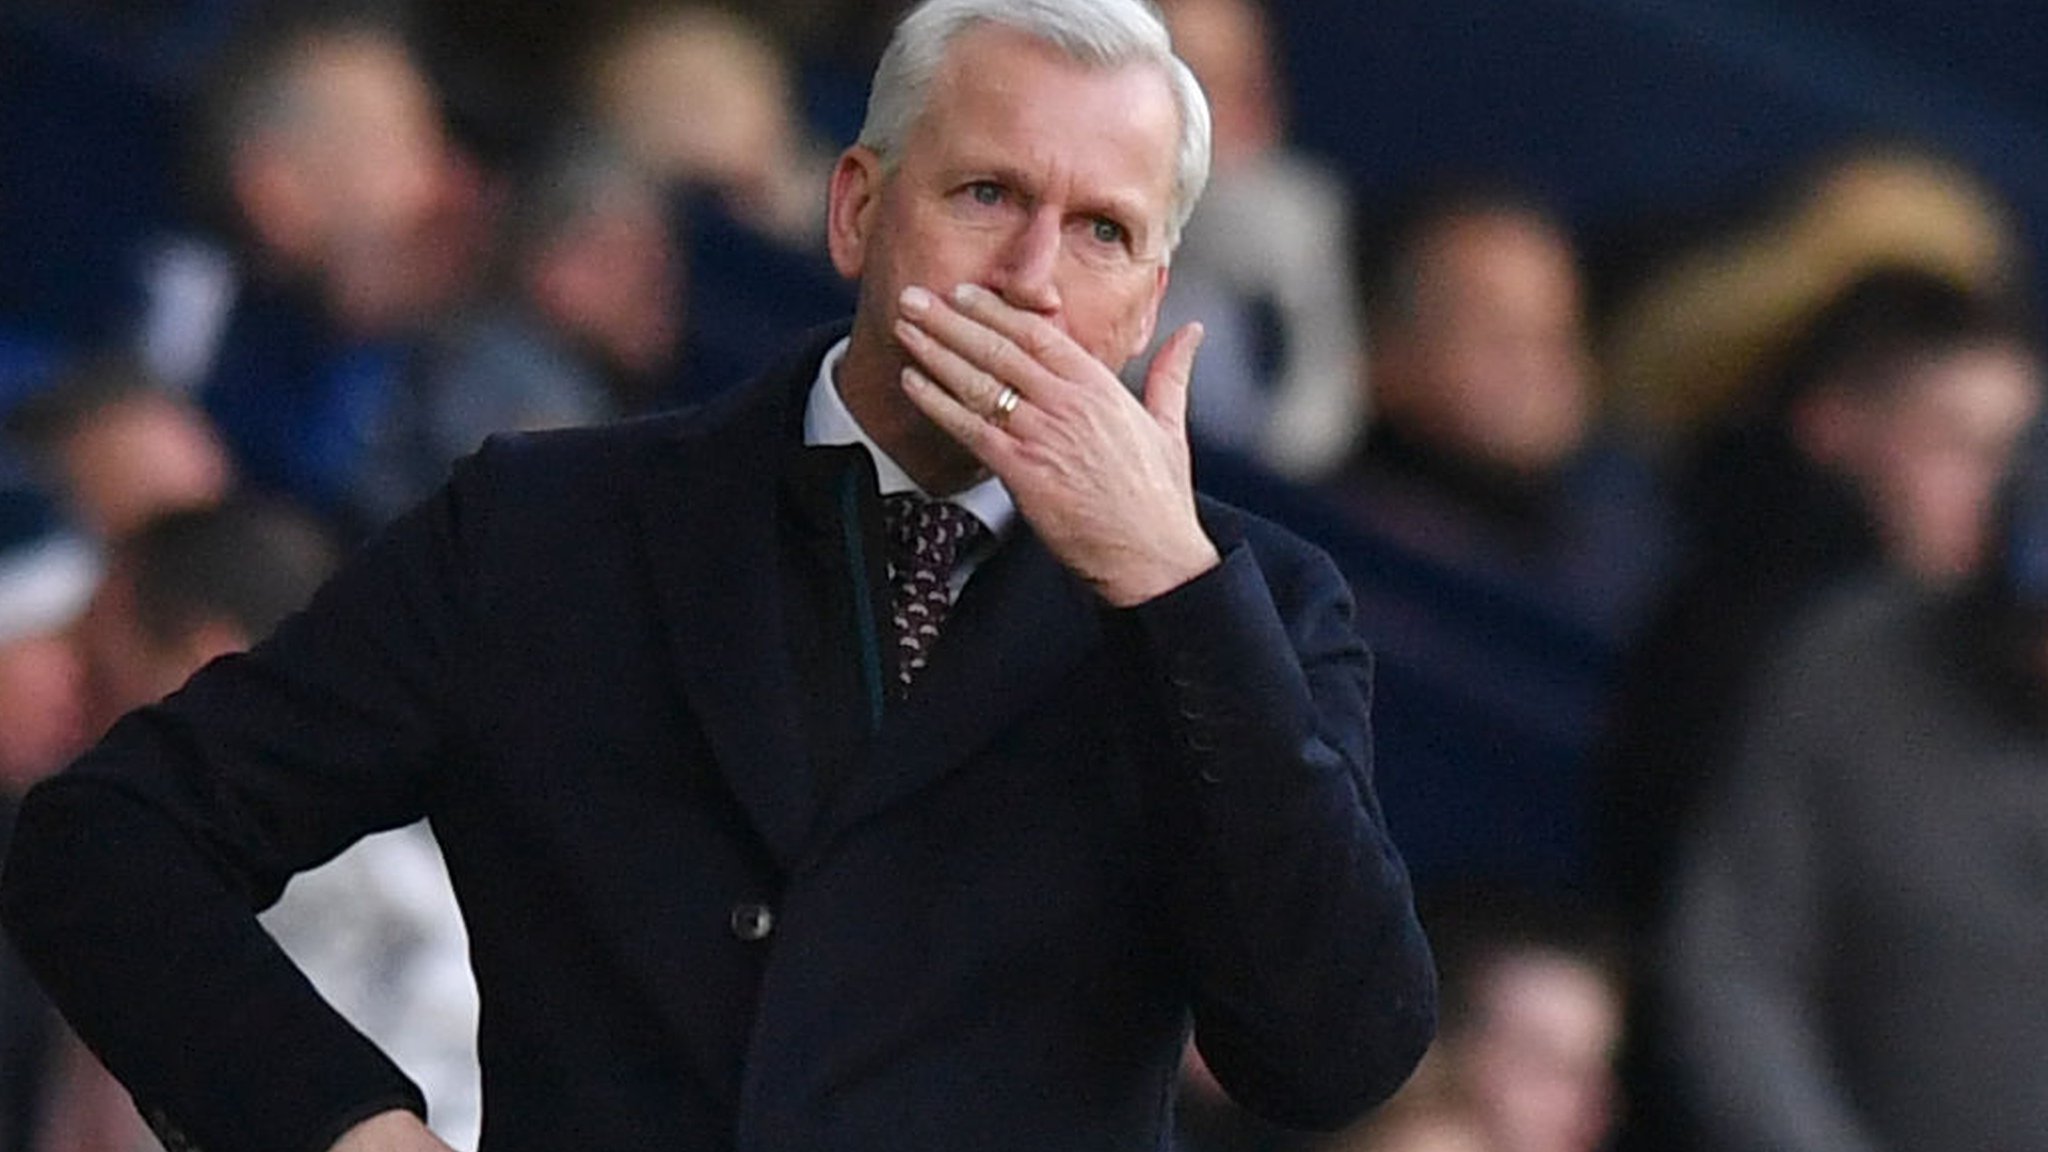 Pardew hopes for a chance to 'find a way to win'